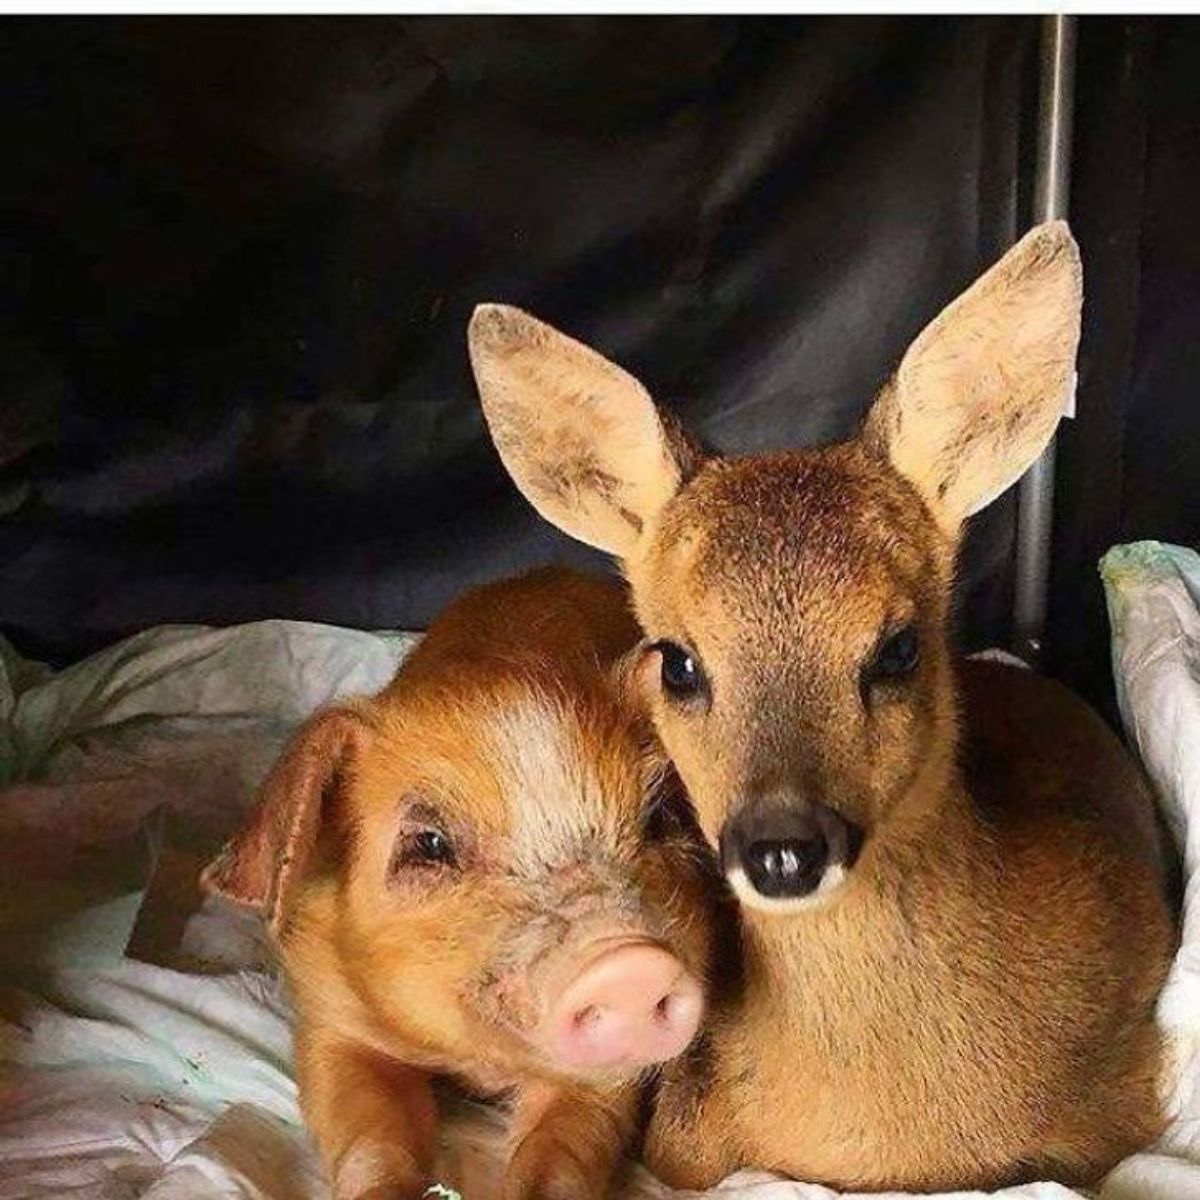 brown piglet and brown deer laying together